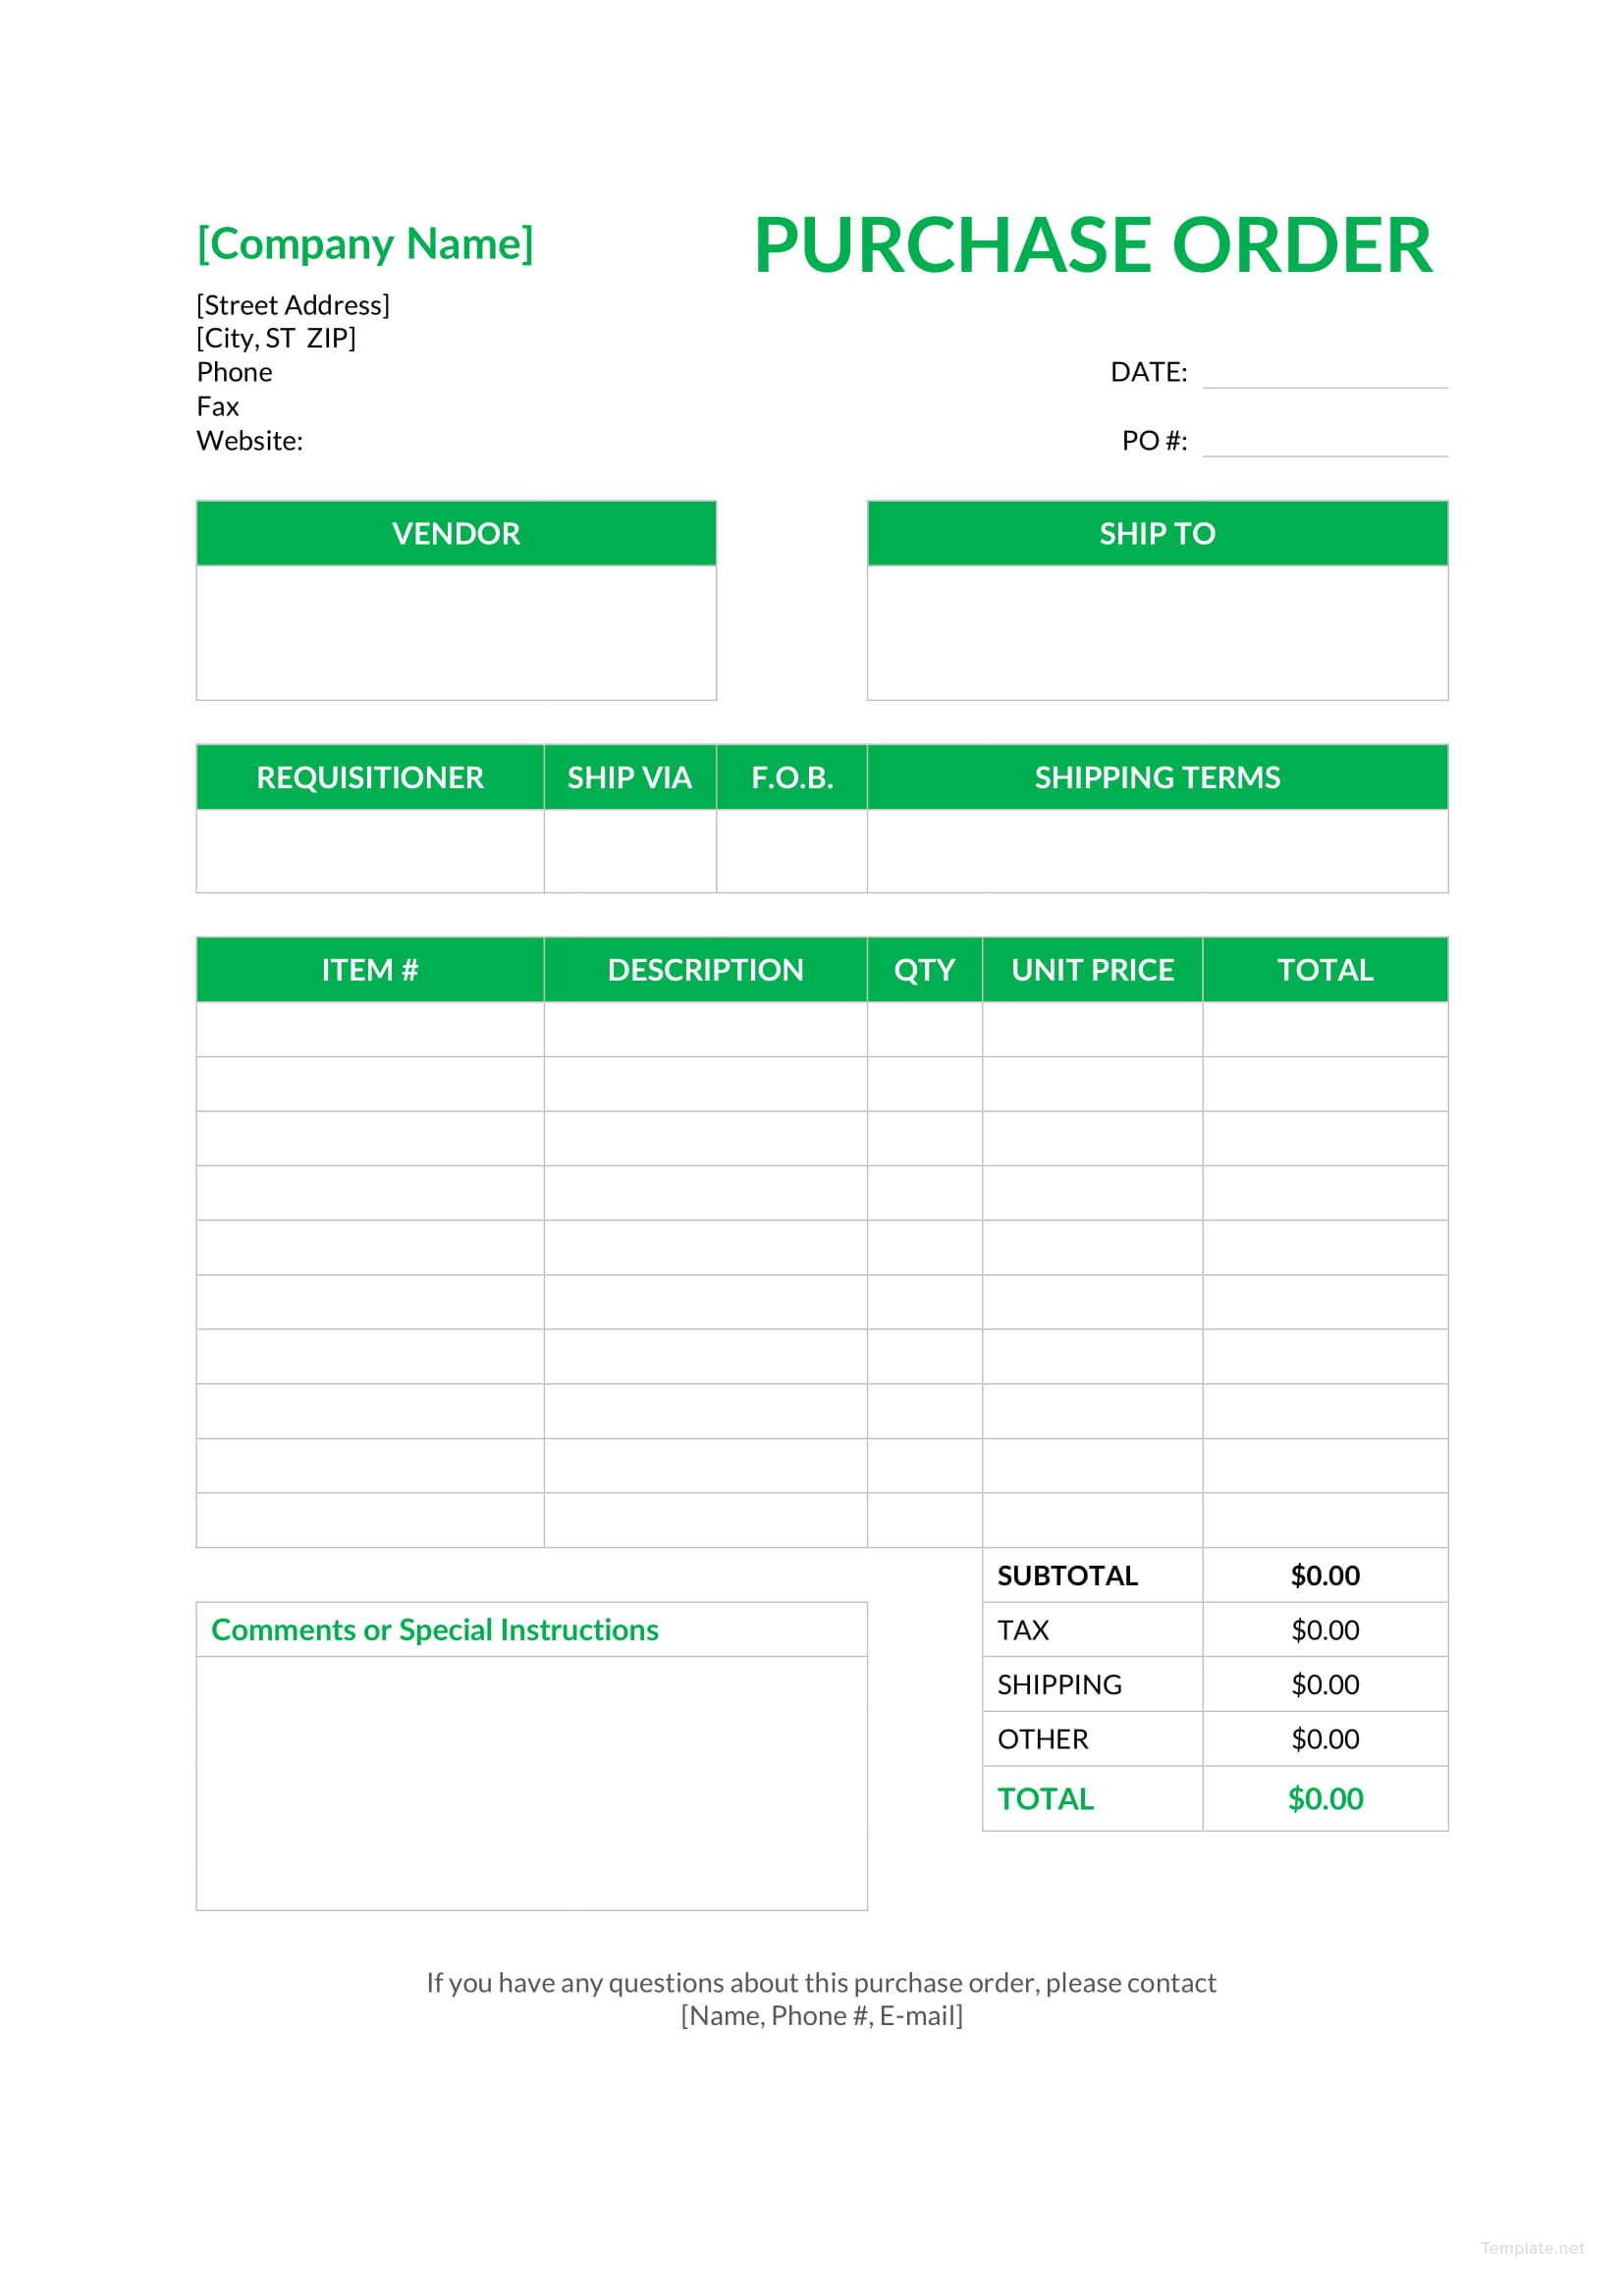 Blank Purchase Order Template in Microsoft Word, Excel, PDF, Apple ...